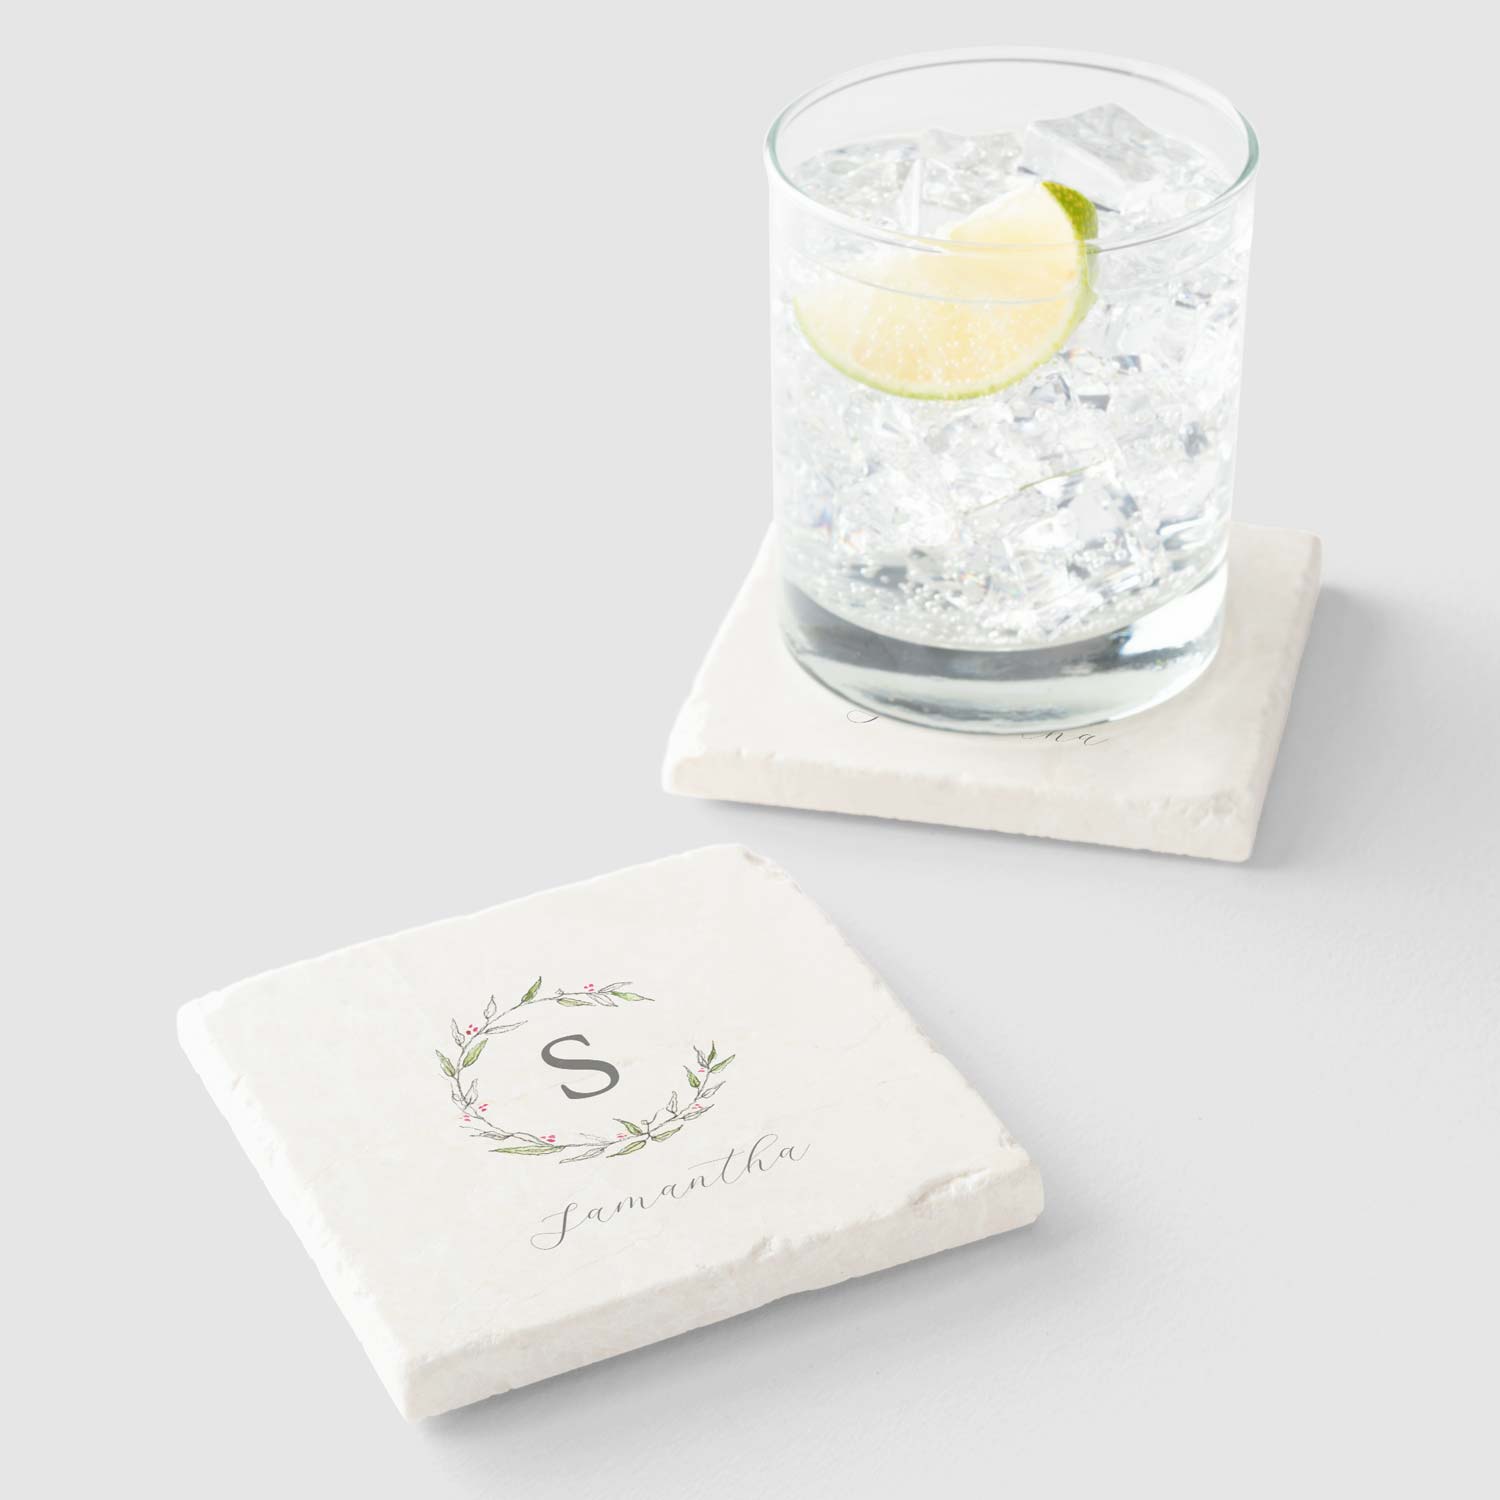 Personalized stone coasters feature unique art by Victoria Grigaliunas of Do Tell A Belle. Click to shop the complete line.